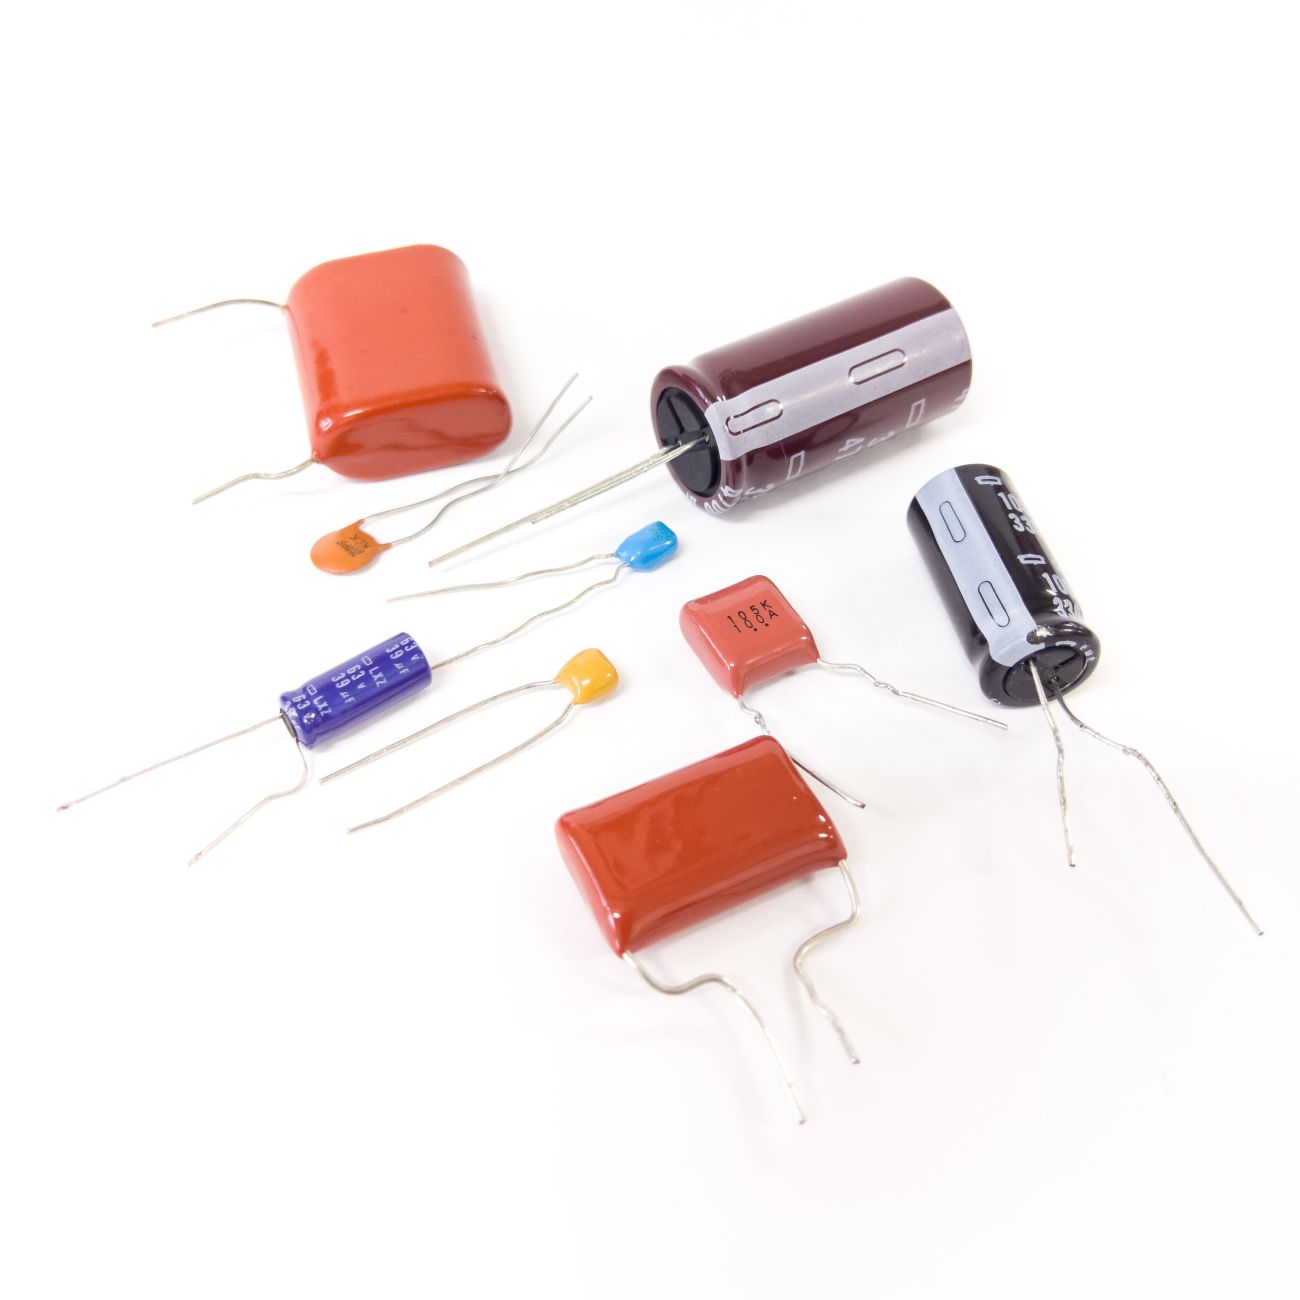 What They do not Teach you About Capacitors